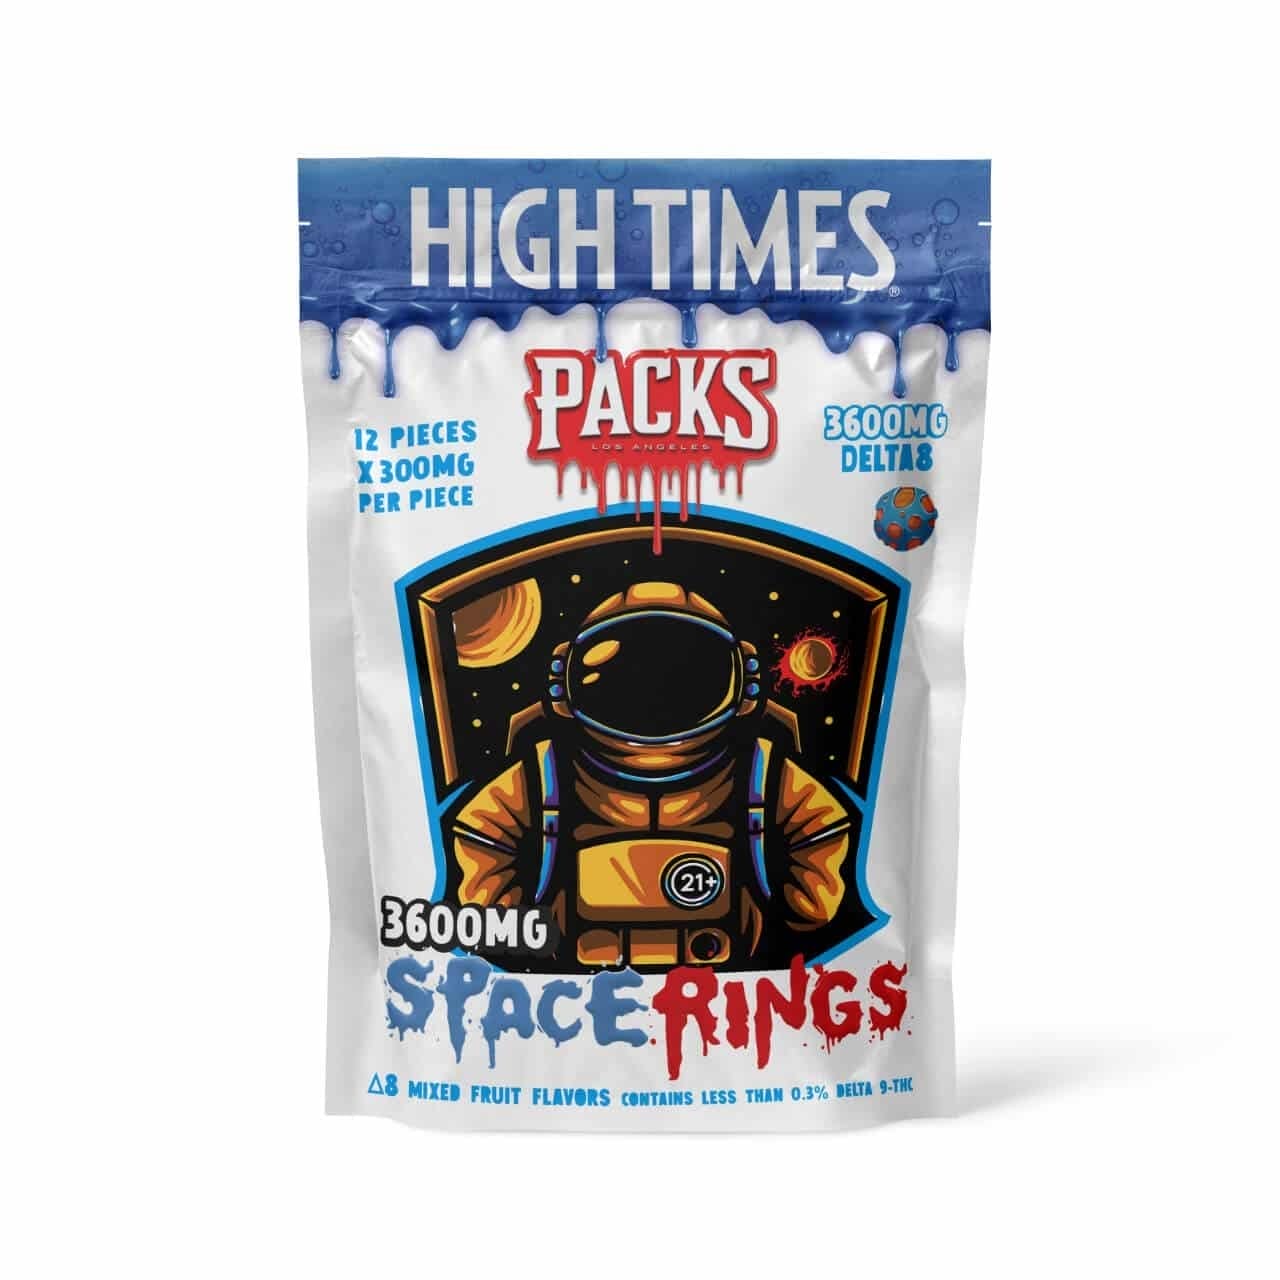 Image of Packs x High Times Delta Space Rings 3600mg 12pc